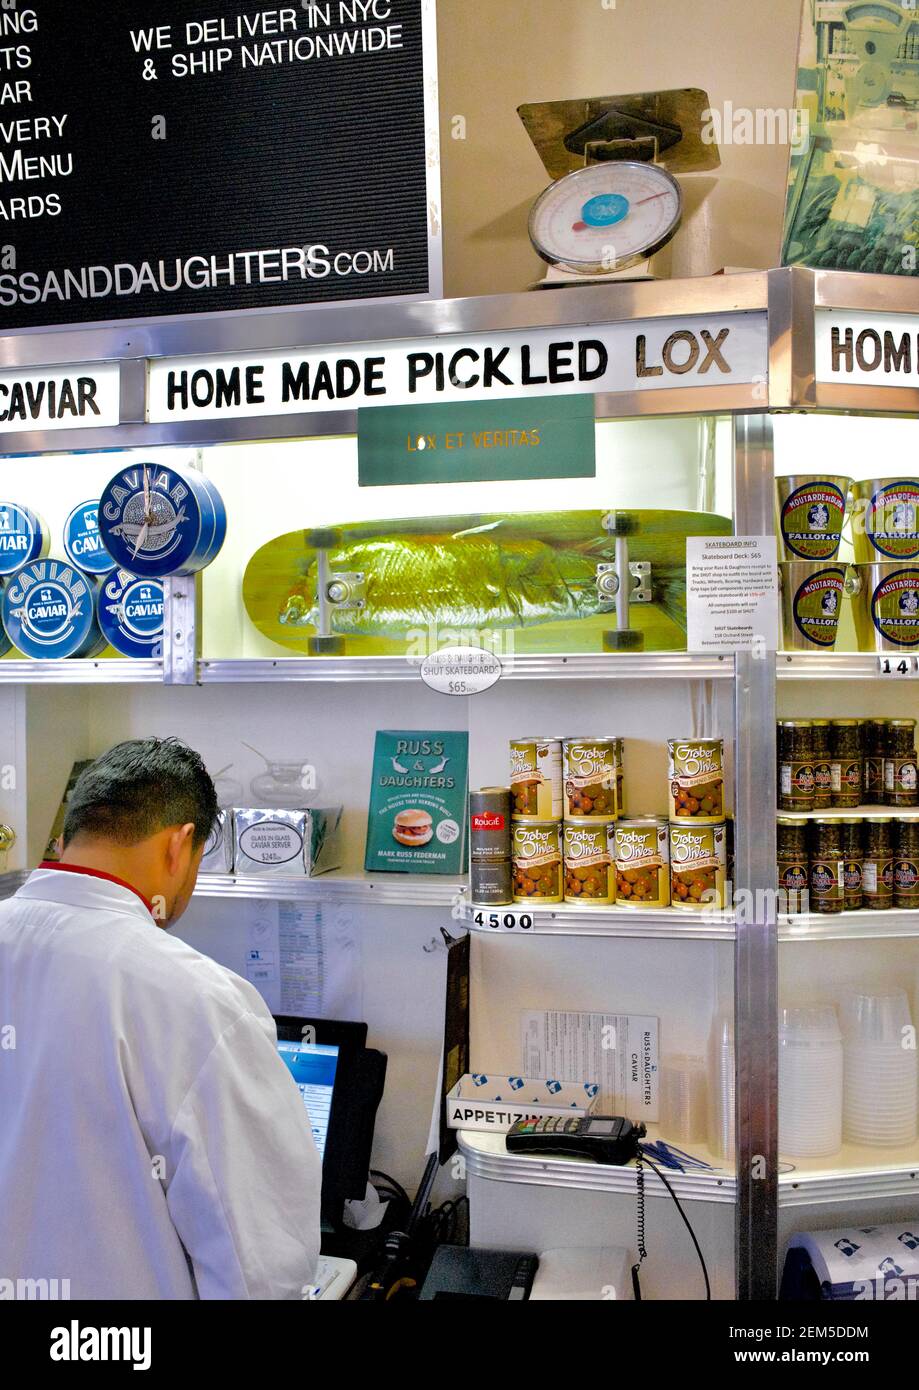 Russ & Daughters is a New York culinary and cultural icon, known for the highest quality appetizing foods: smoked fish, caviar, bagels, bialys Stock Photo